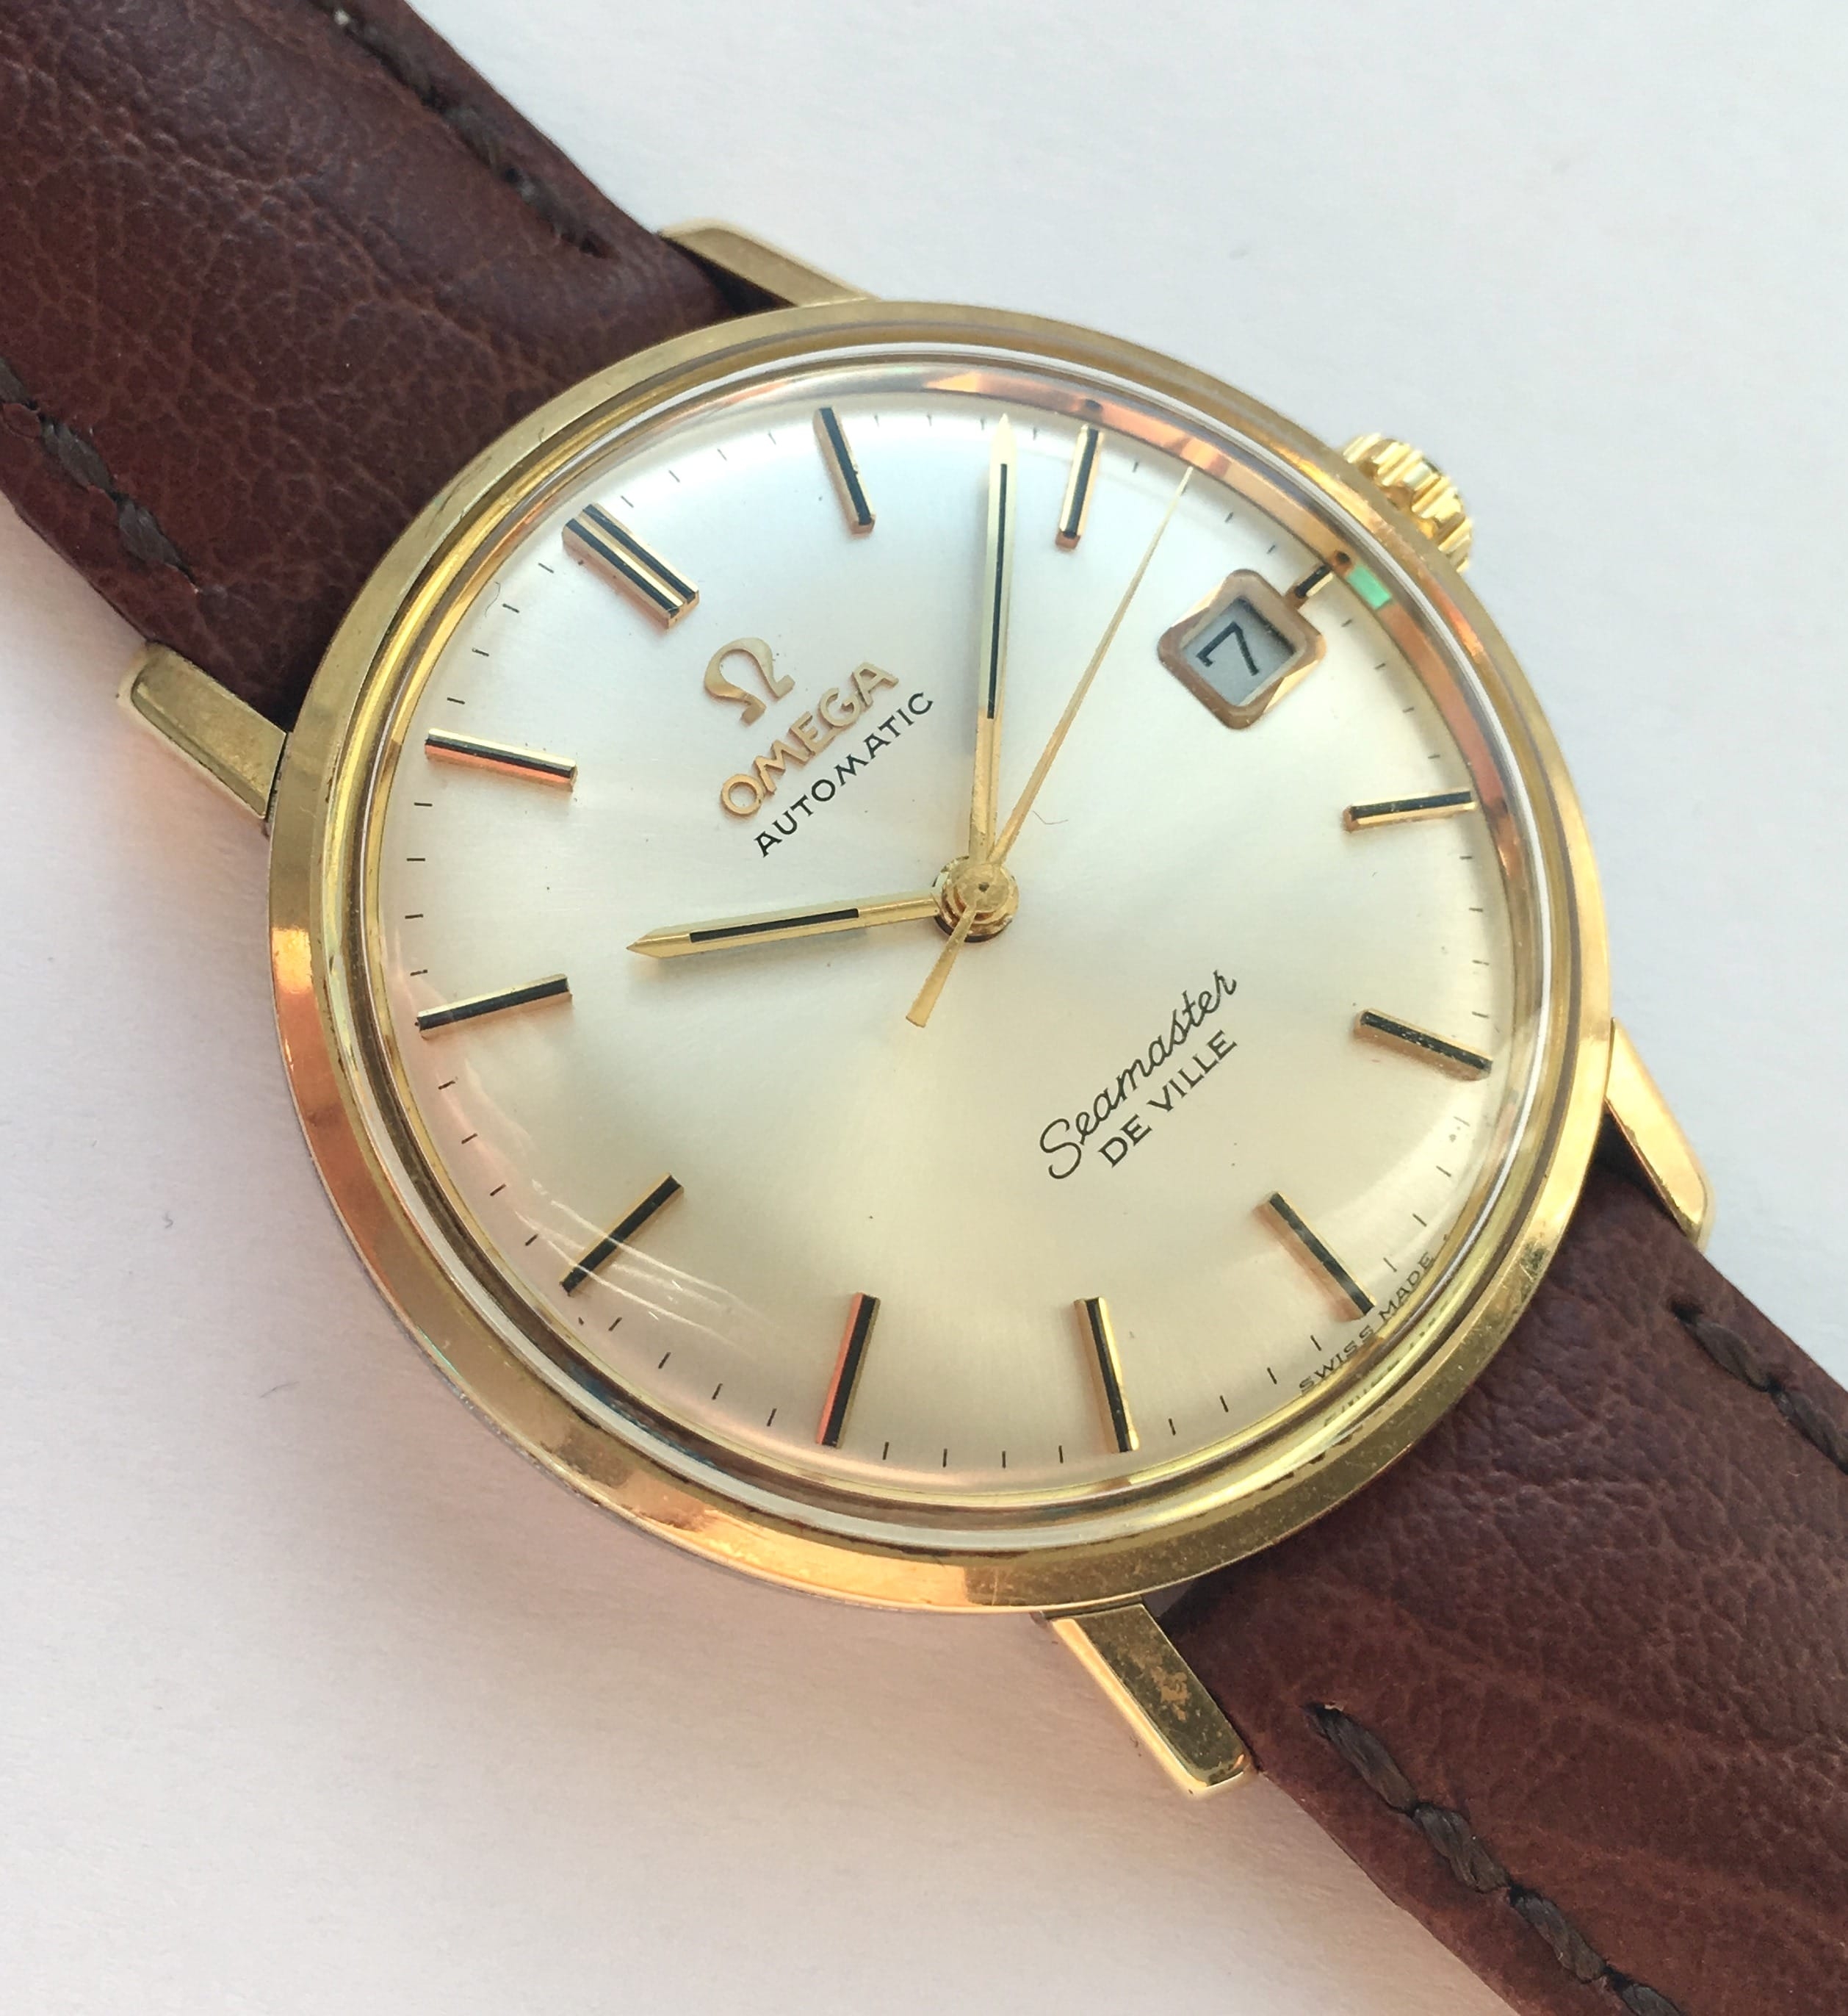 1967 Perfect Omega Seamaster De Ville with Date | Vintage ...